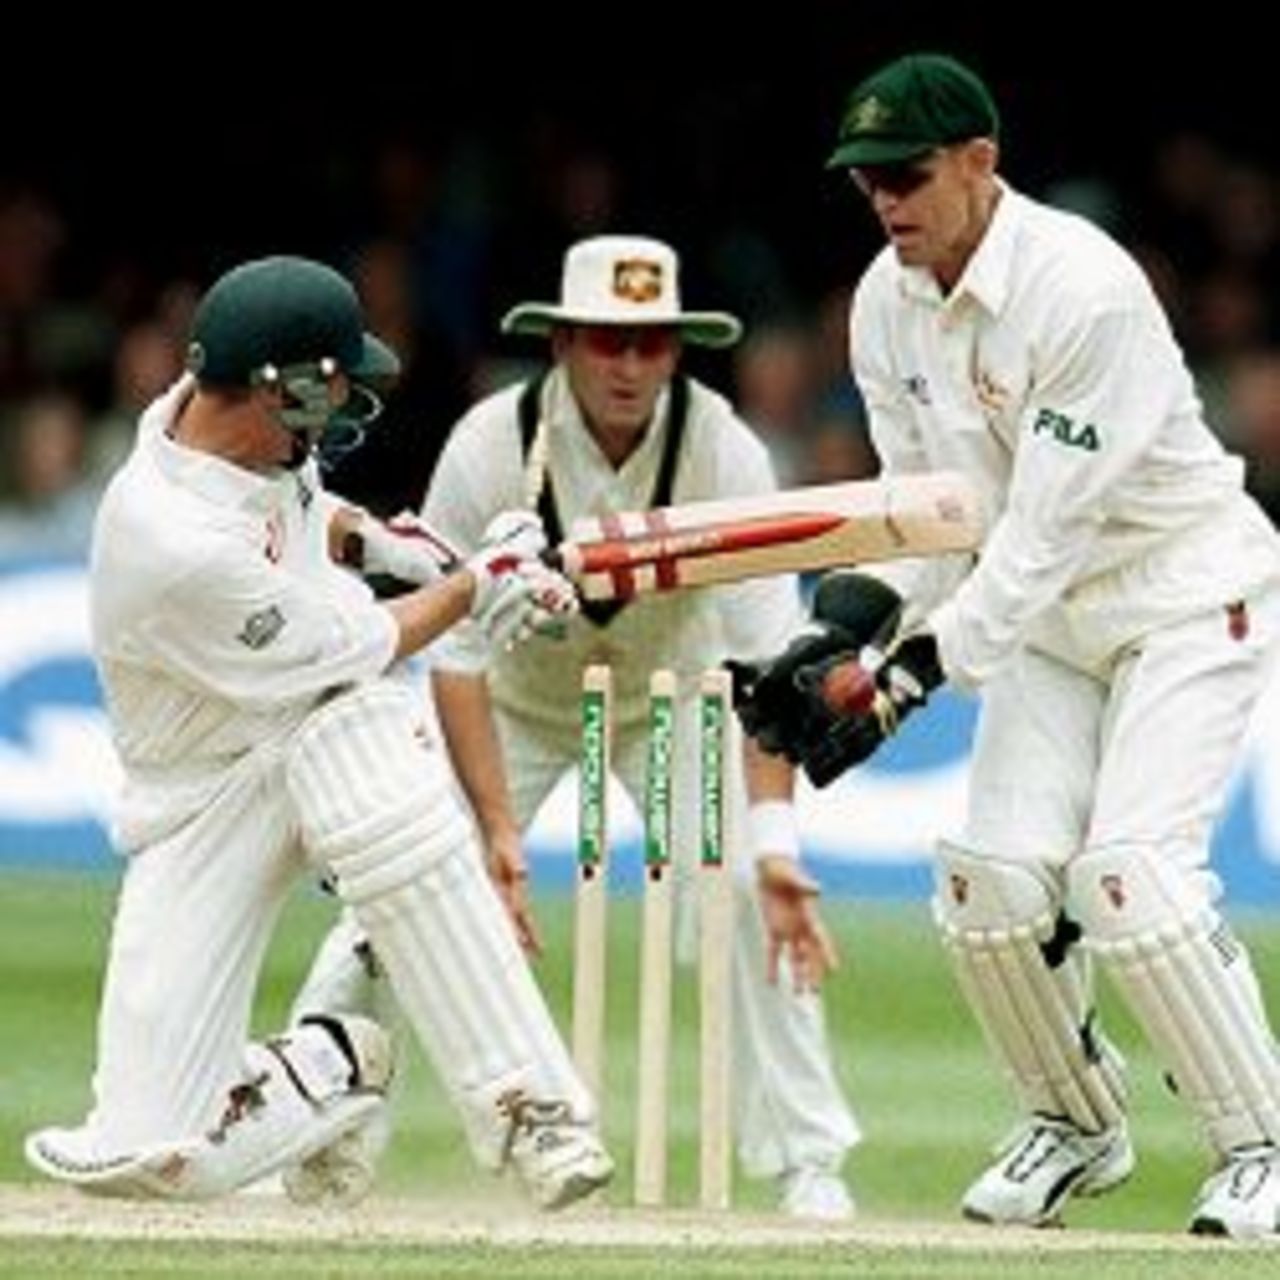 21 Jul 2001: Michael Atherton of England is bowled round his legs by Shane Warne of Australia during the third day of the Second Npower Test between Engalnd and Australia at Lord's, London.